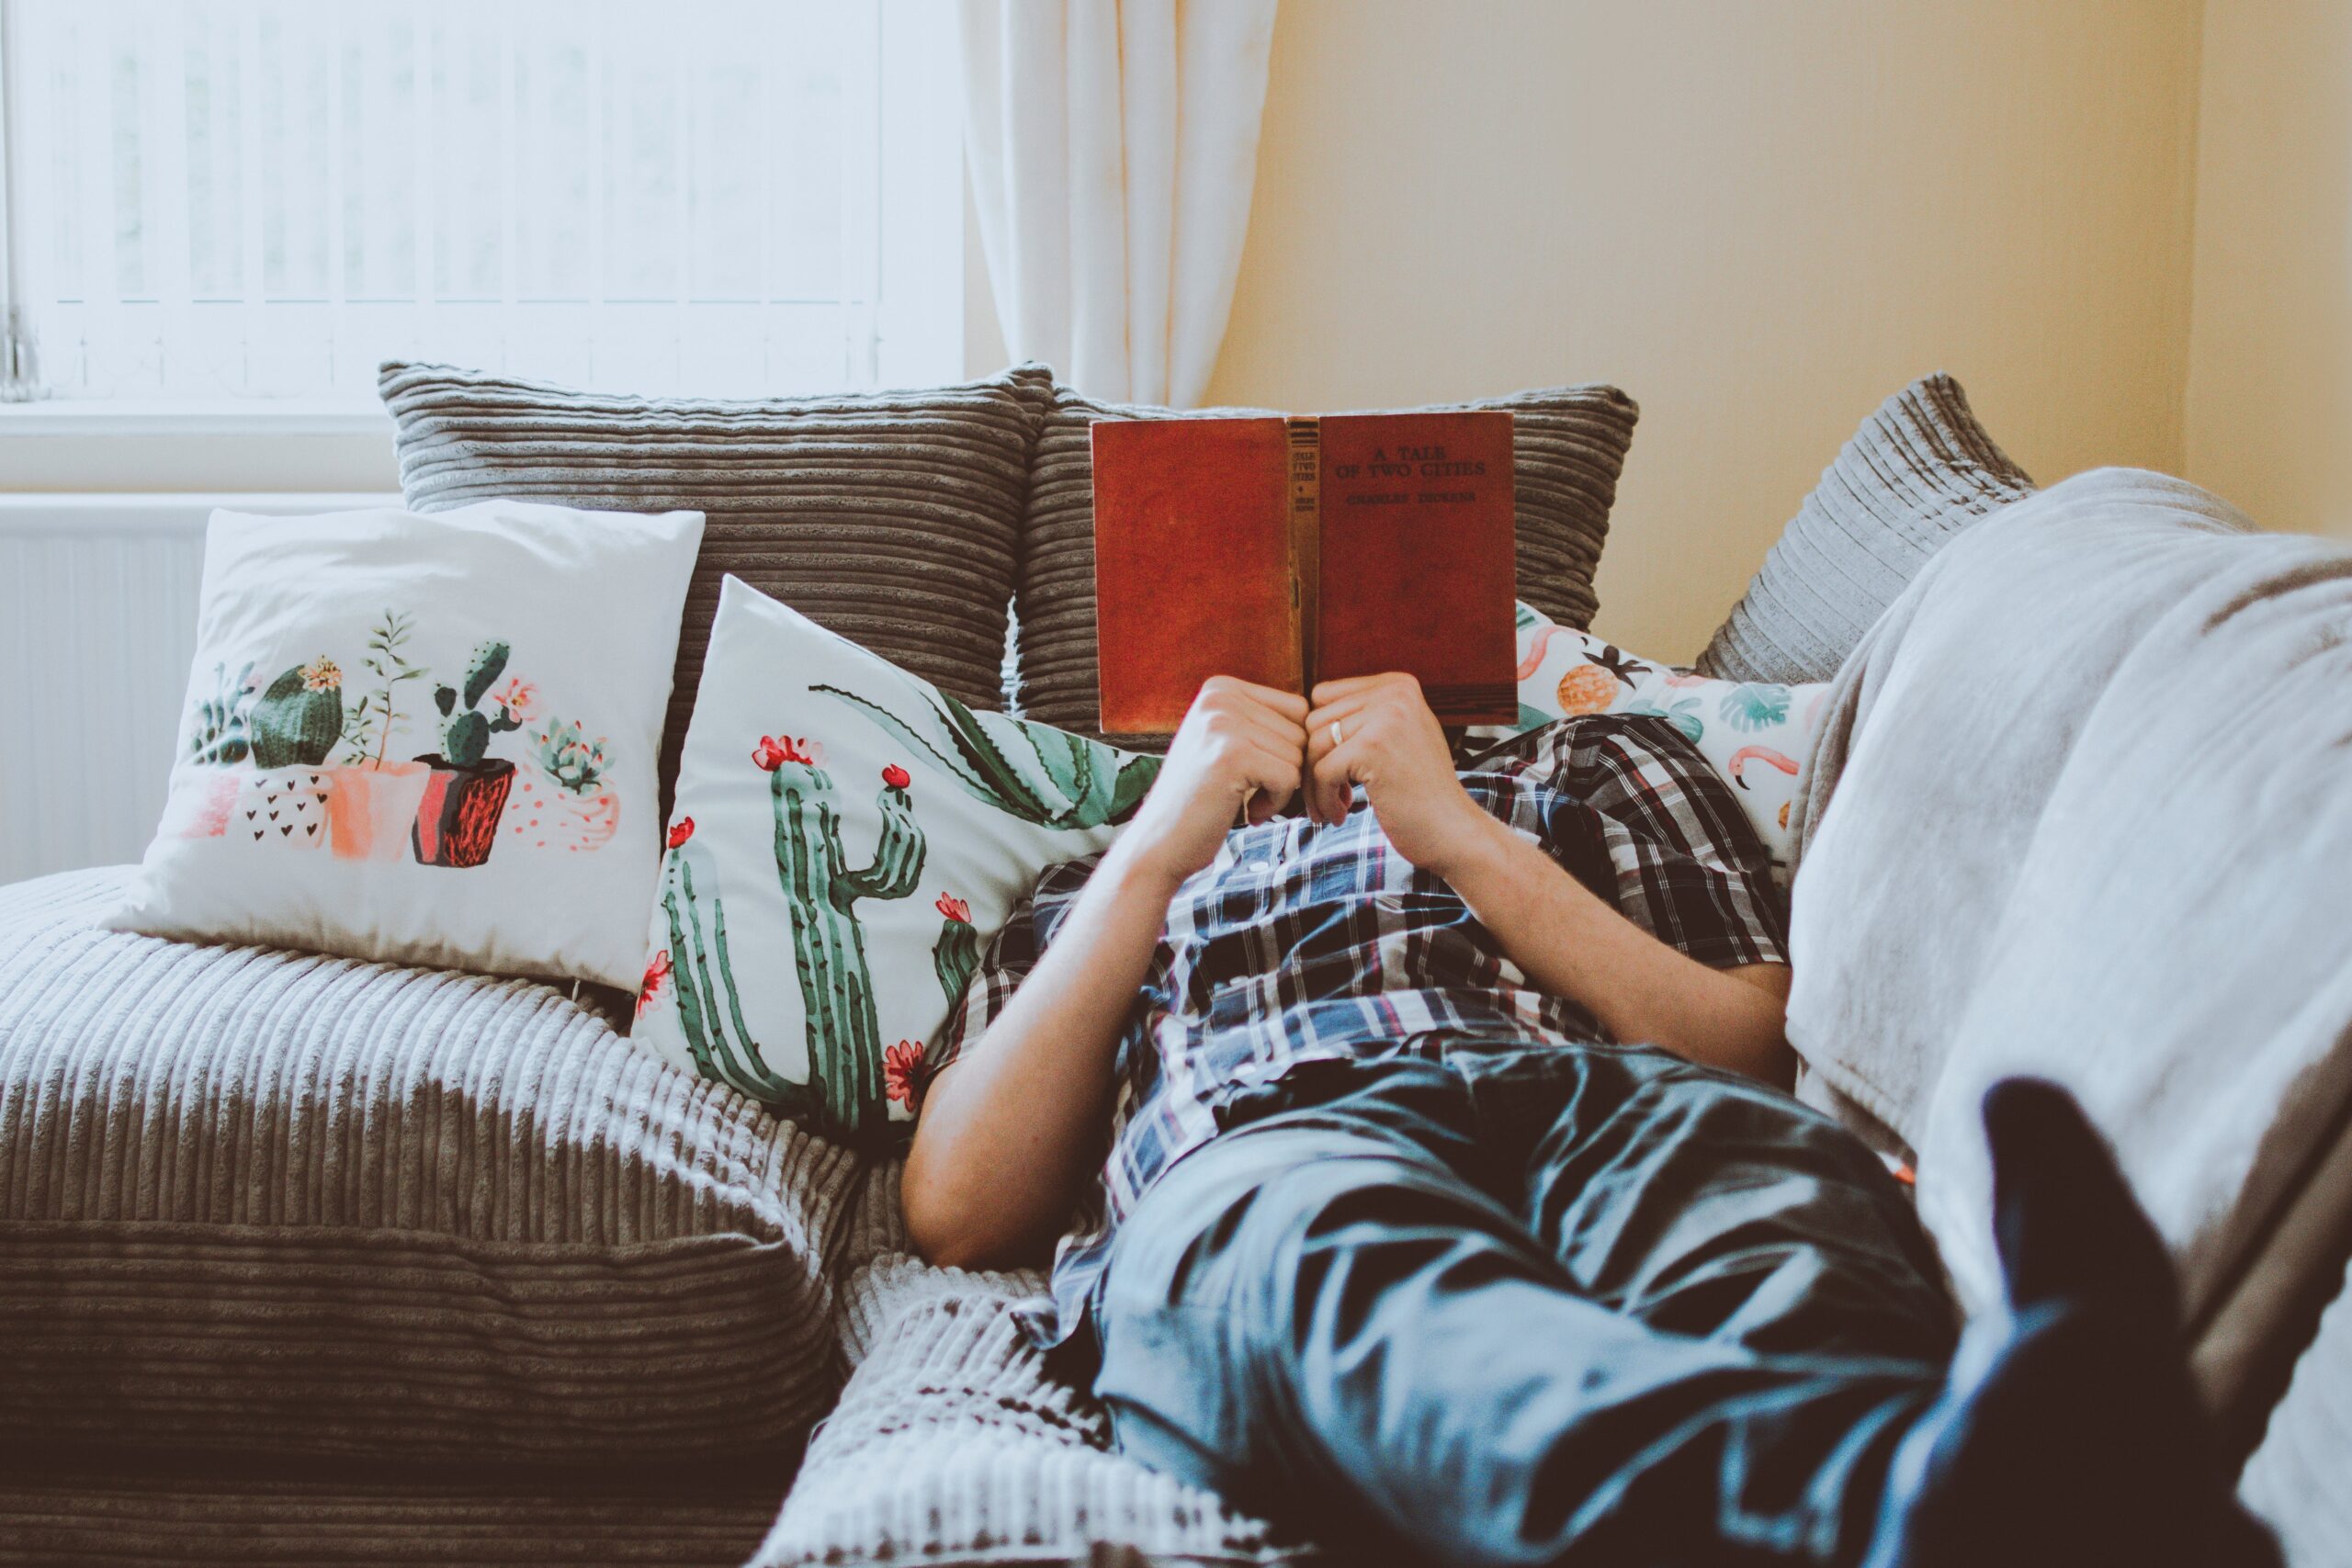 man reading on couch